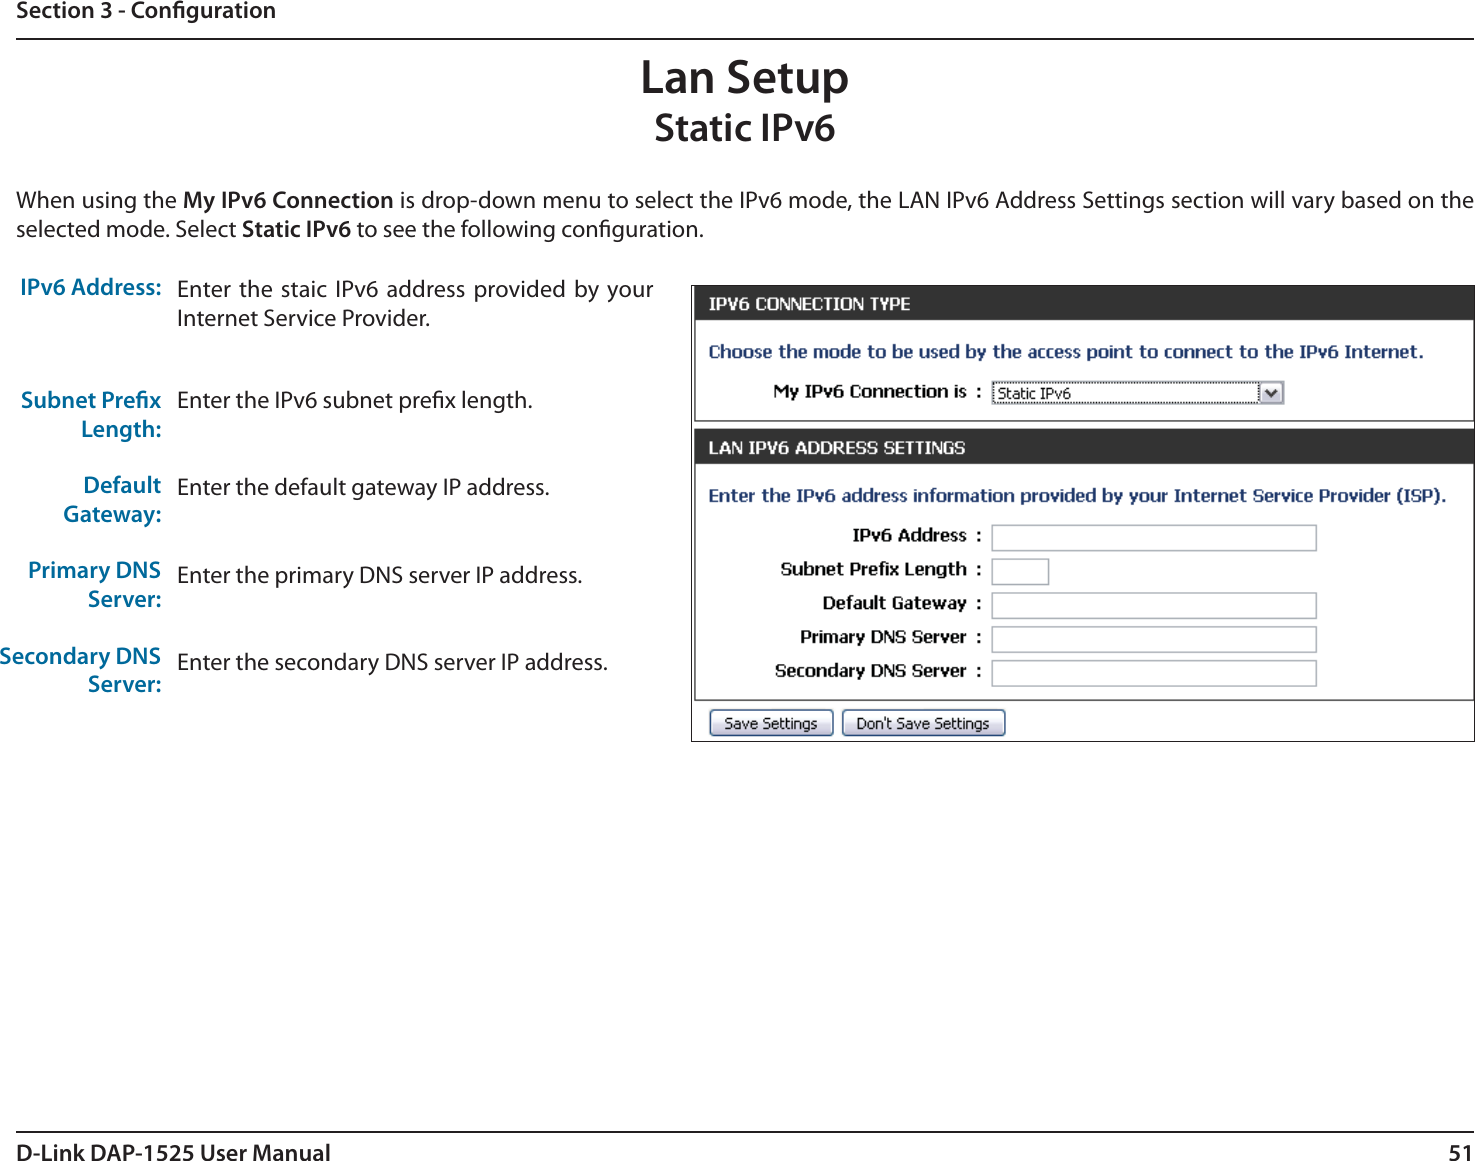 51D-Link DAP-1525 User ManualSection 3 - CongurationLan SetupStatic IPv6When using the My IPv6 Connection is drop-down menu to select the IPv6 mode, the LAN IPv6 Address Settings section will vary based on the selected mode. Select Static IPv6 to see the following conguration.IPv6 Address:Subnet PrexLength:Default Gateway:Primary DNSServer:Secondary DNSServer:Enter the staic IPv6 address provided by your Internet Service Provider.Enter the IPv6 subnet prex length.Enter the default gateway IP address.Enter the primary DNS server IP address.Enter the secondary DNS server IP address.